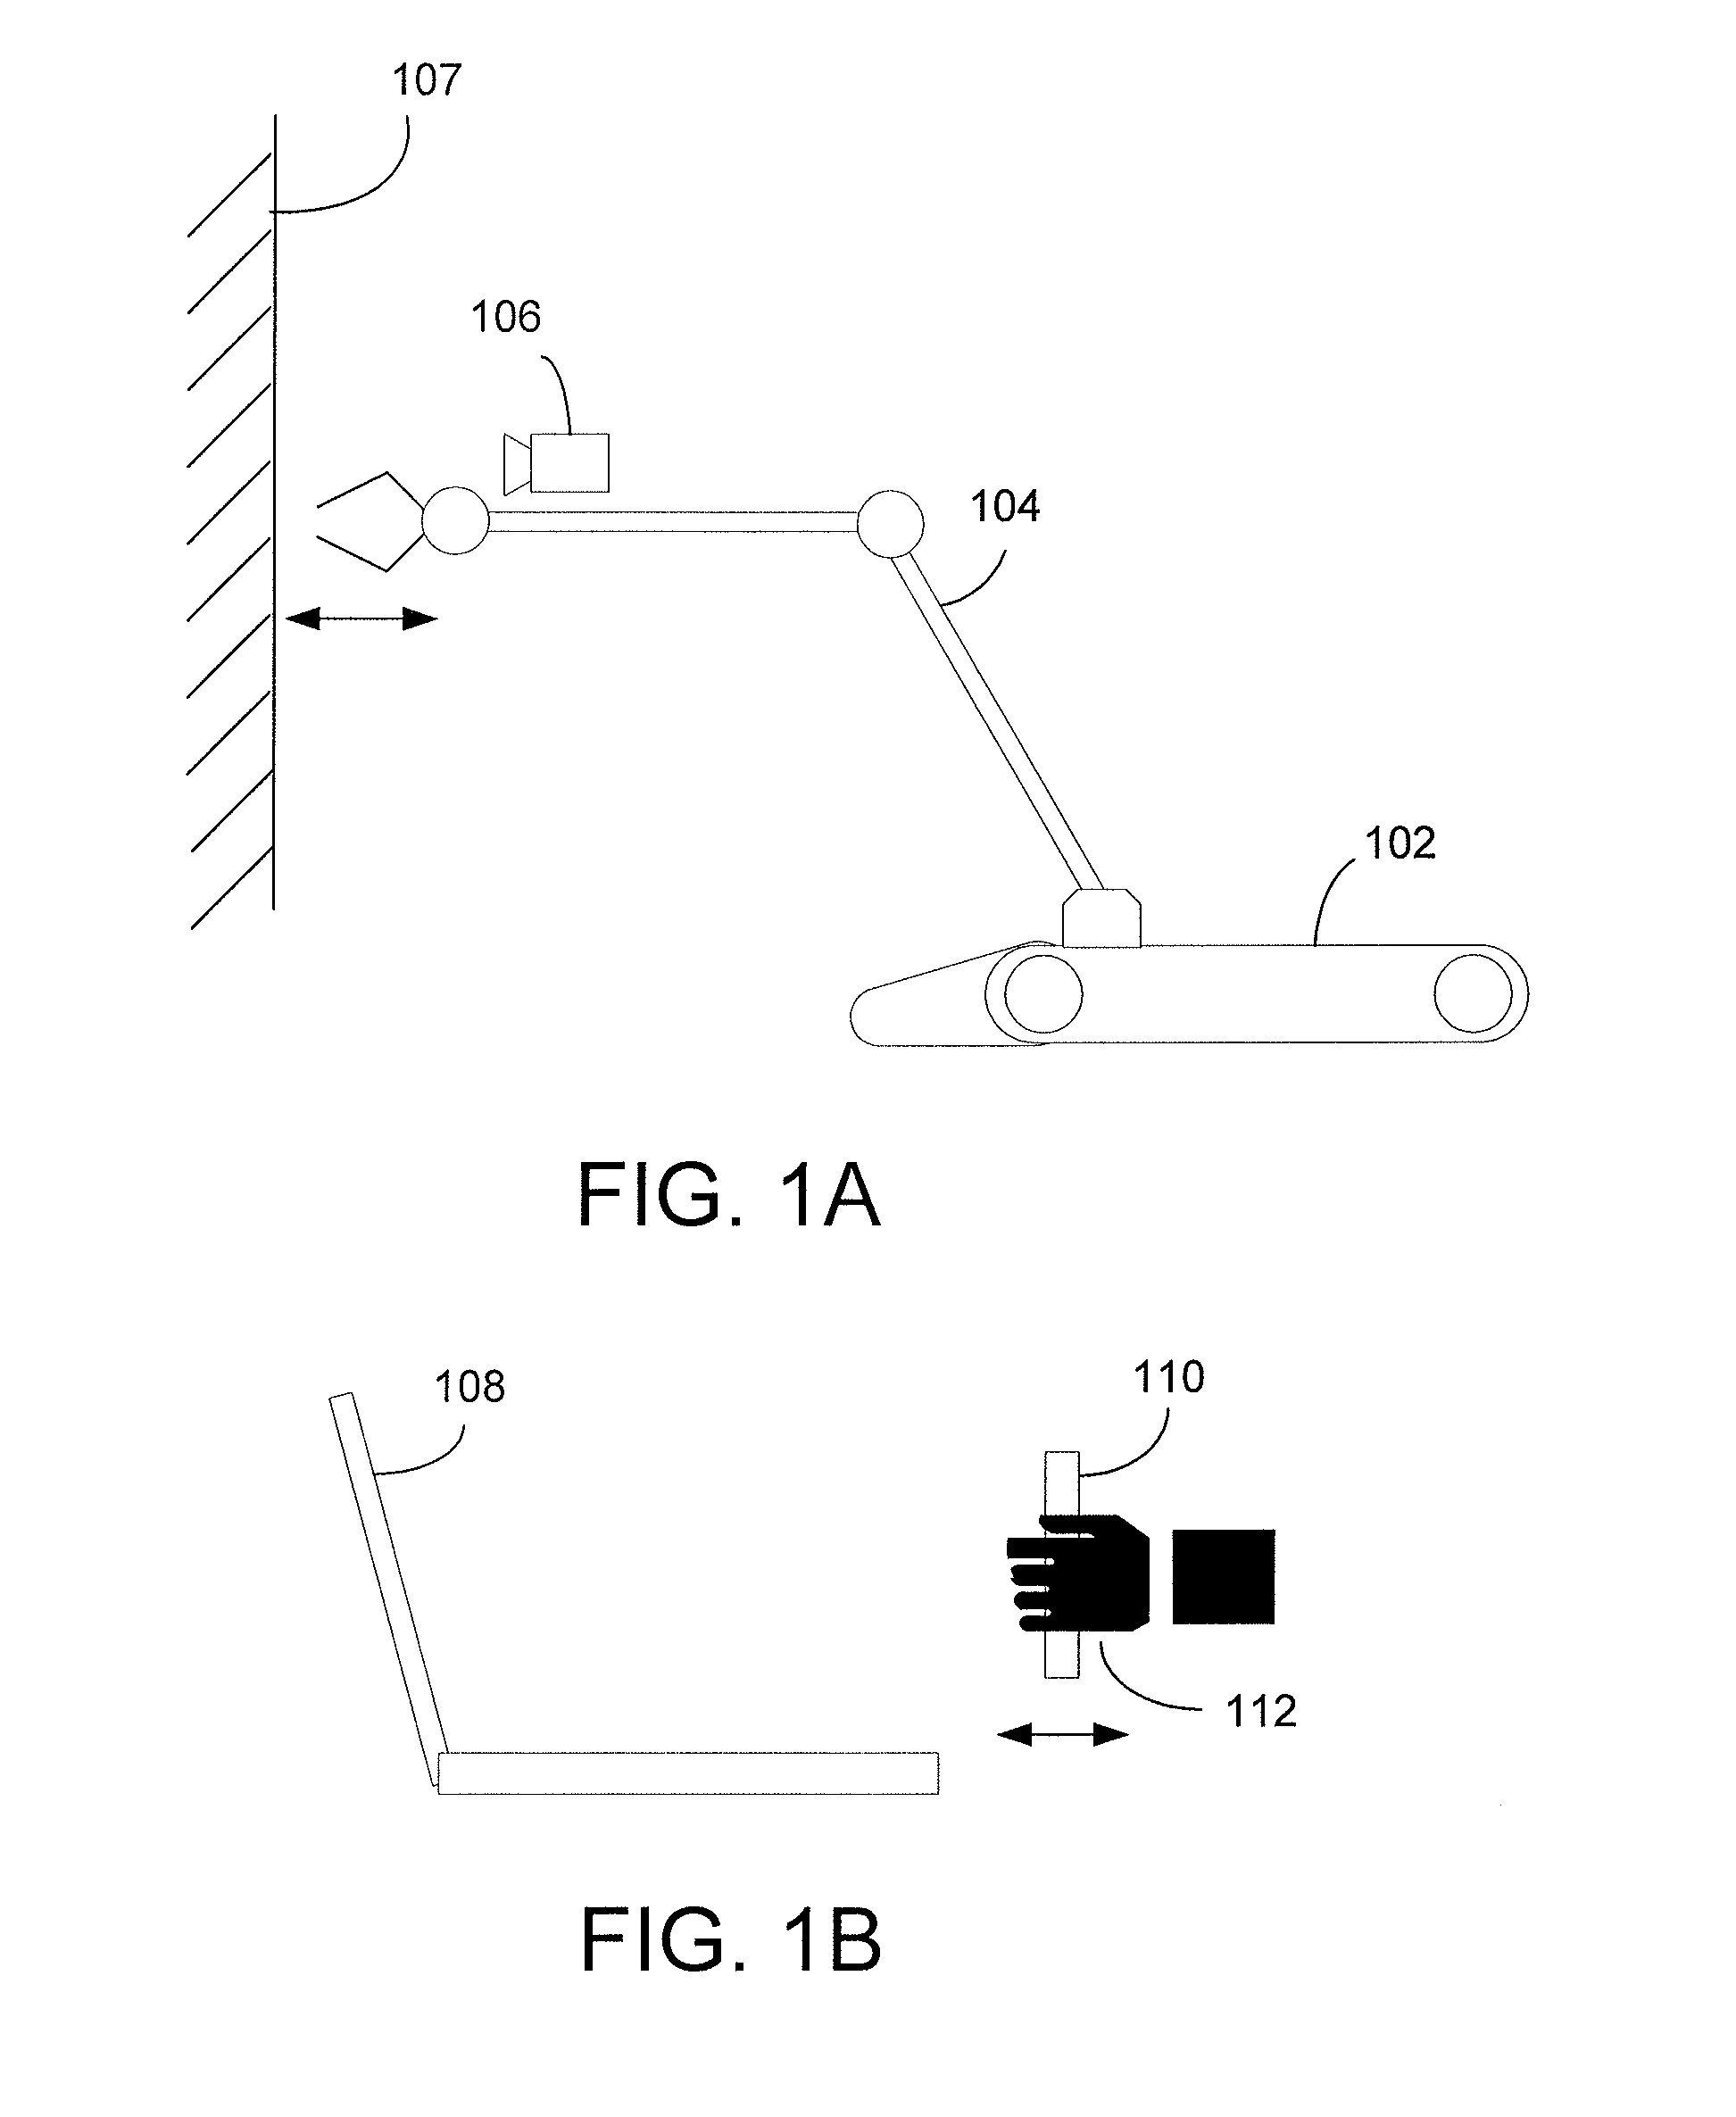 Telematic interface with control signal scaling based on force sensor feedback